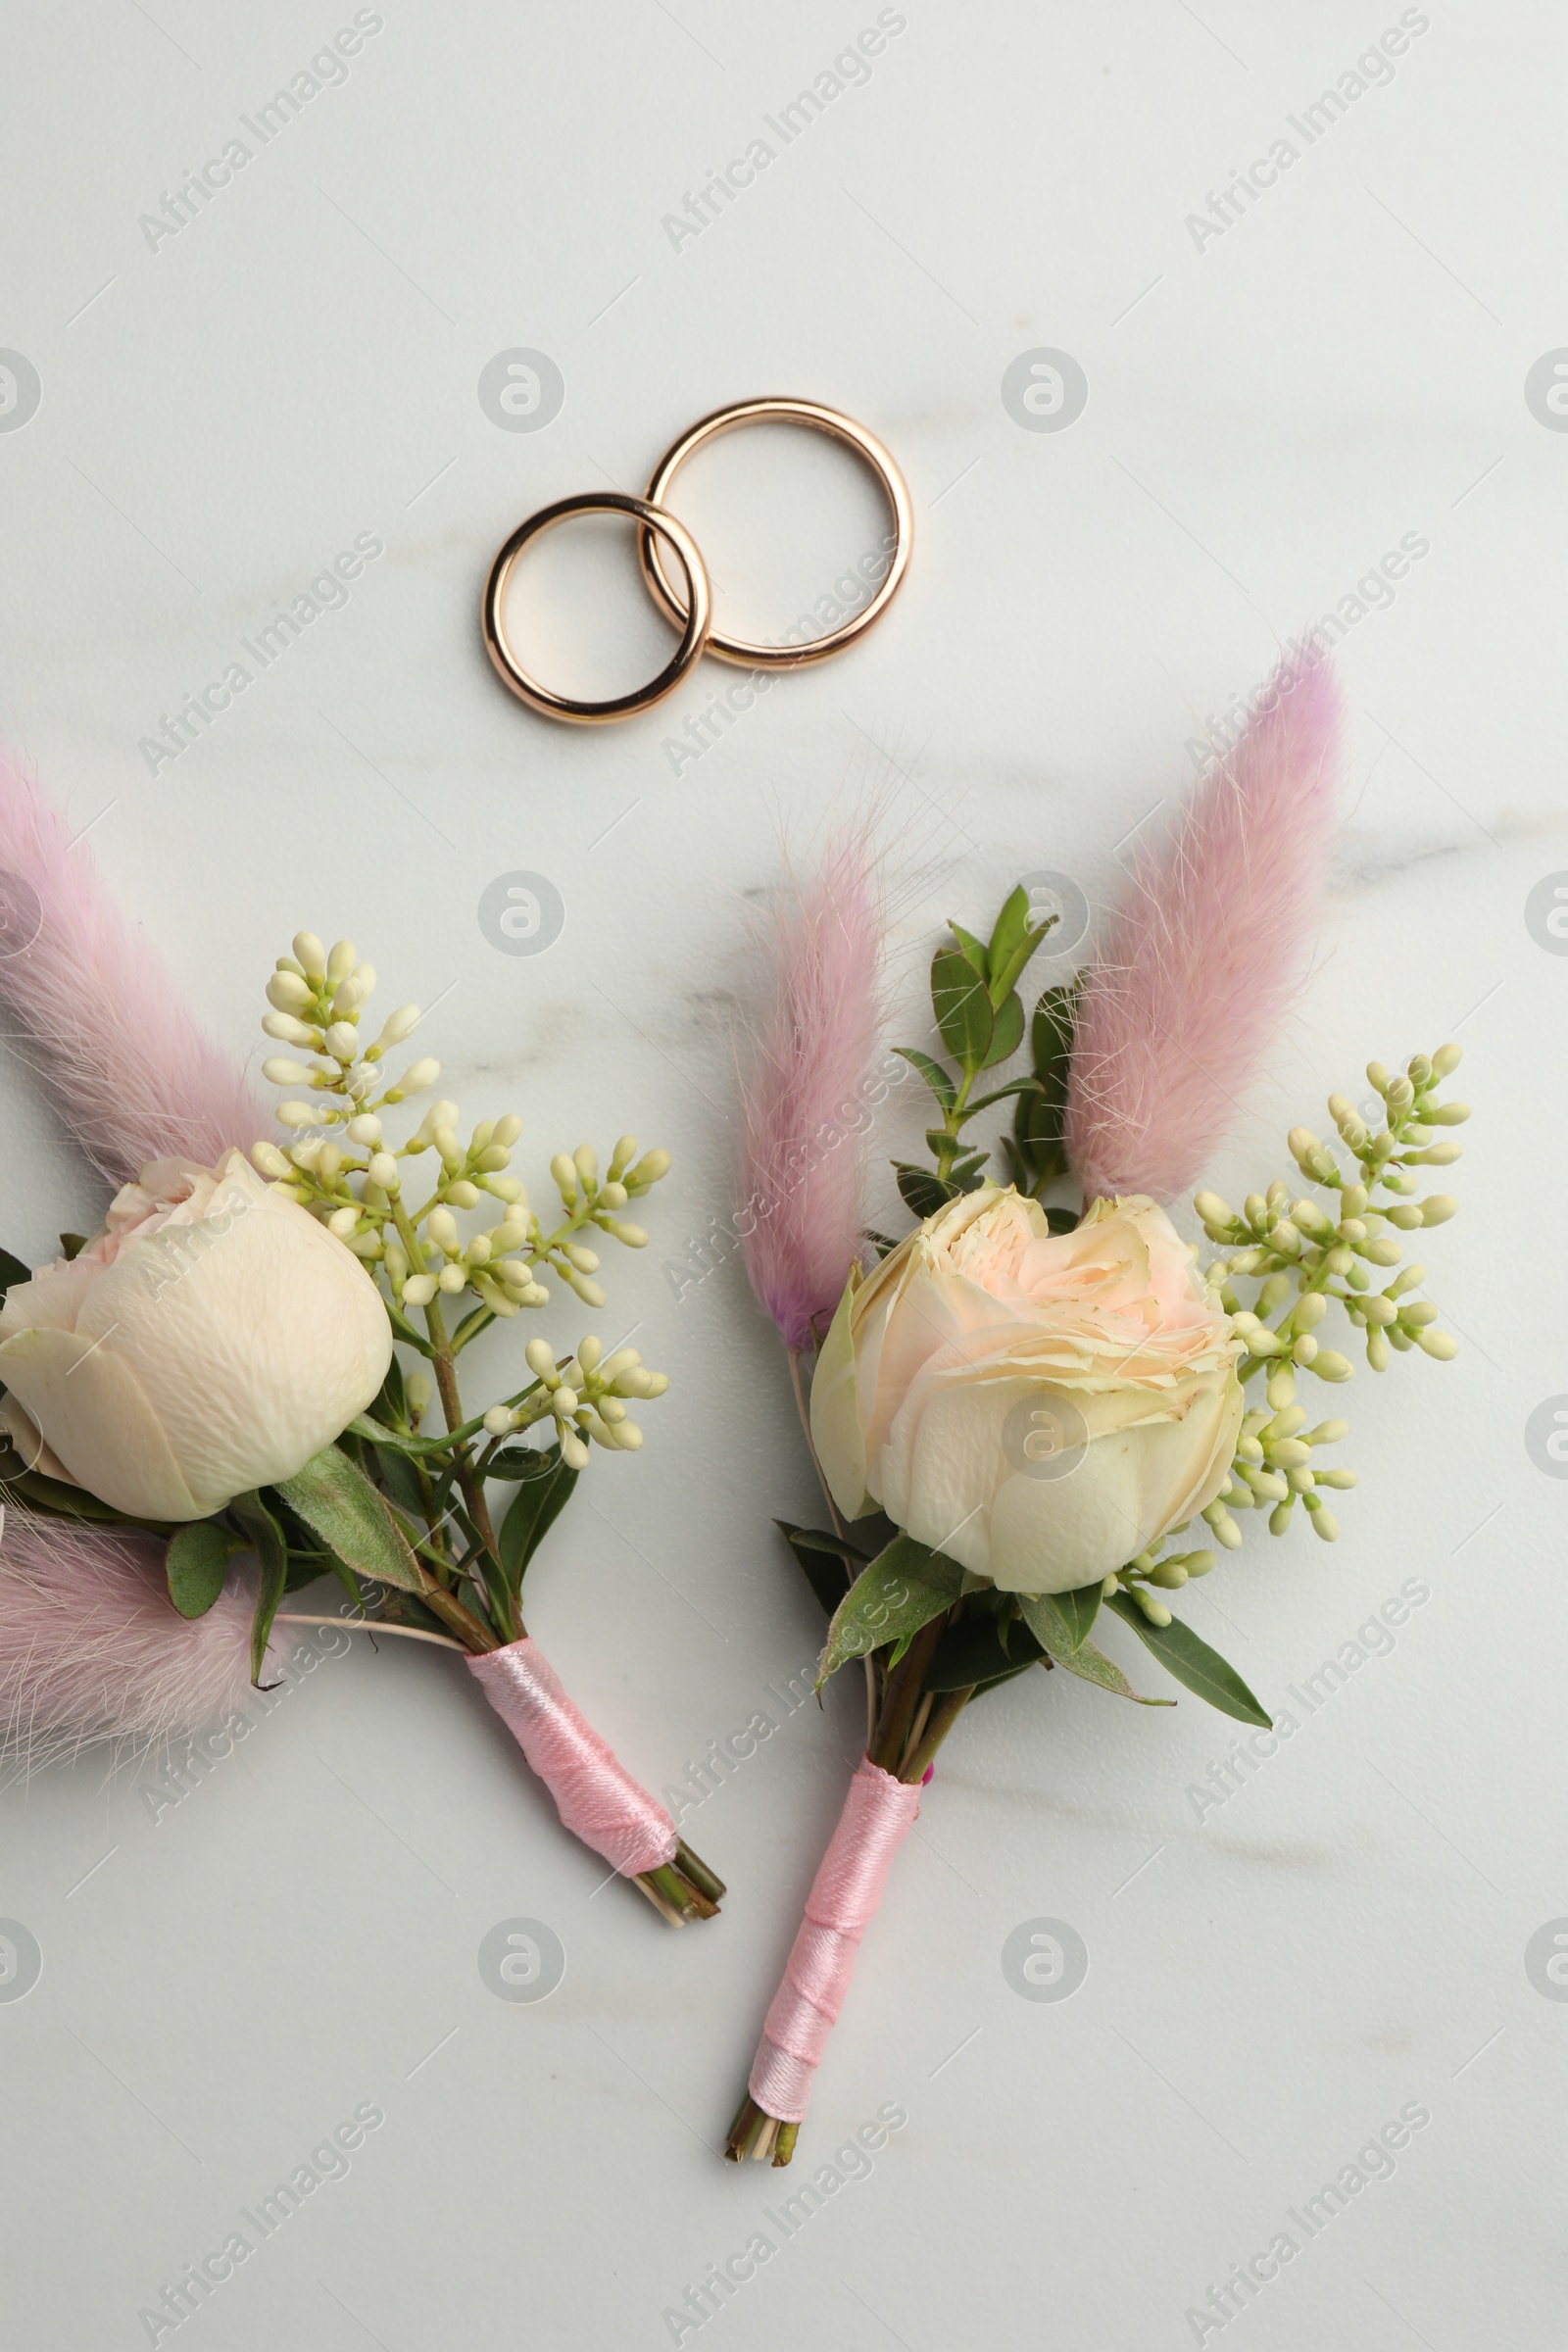 Photo of Small stylish boutonnieres and rings on white marble table, flat lay